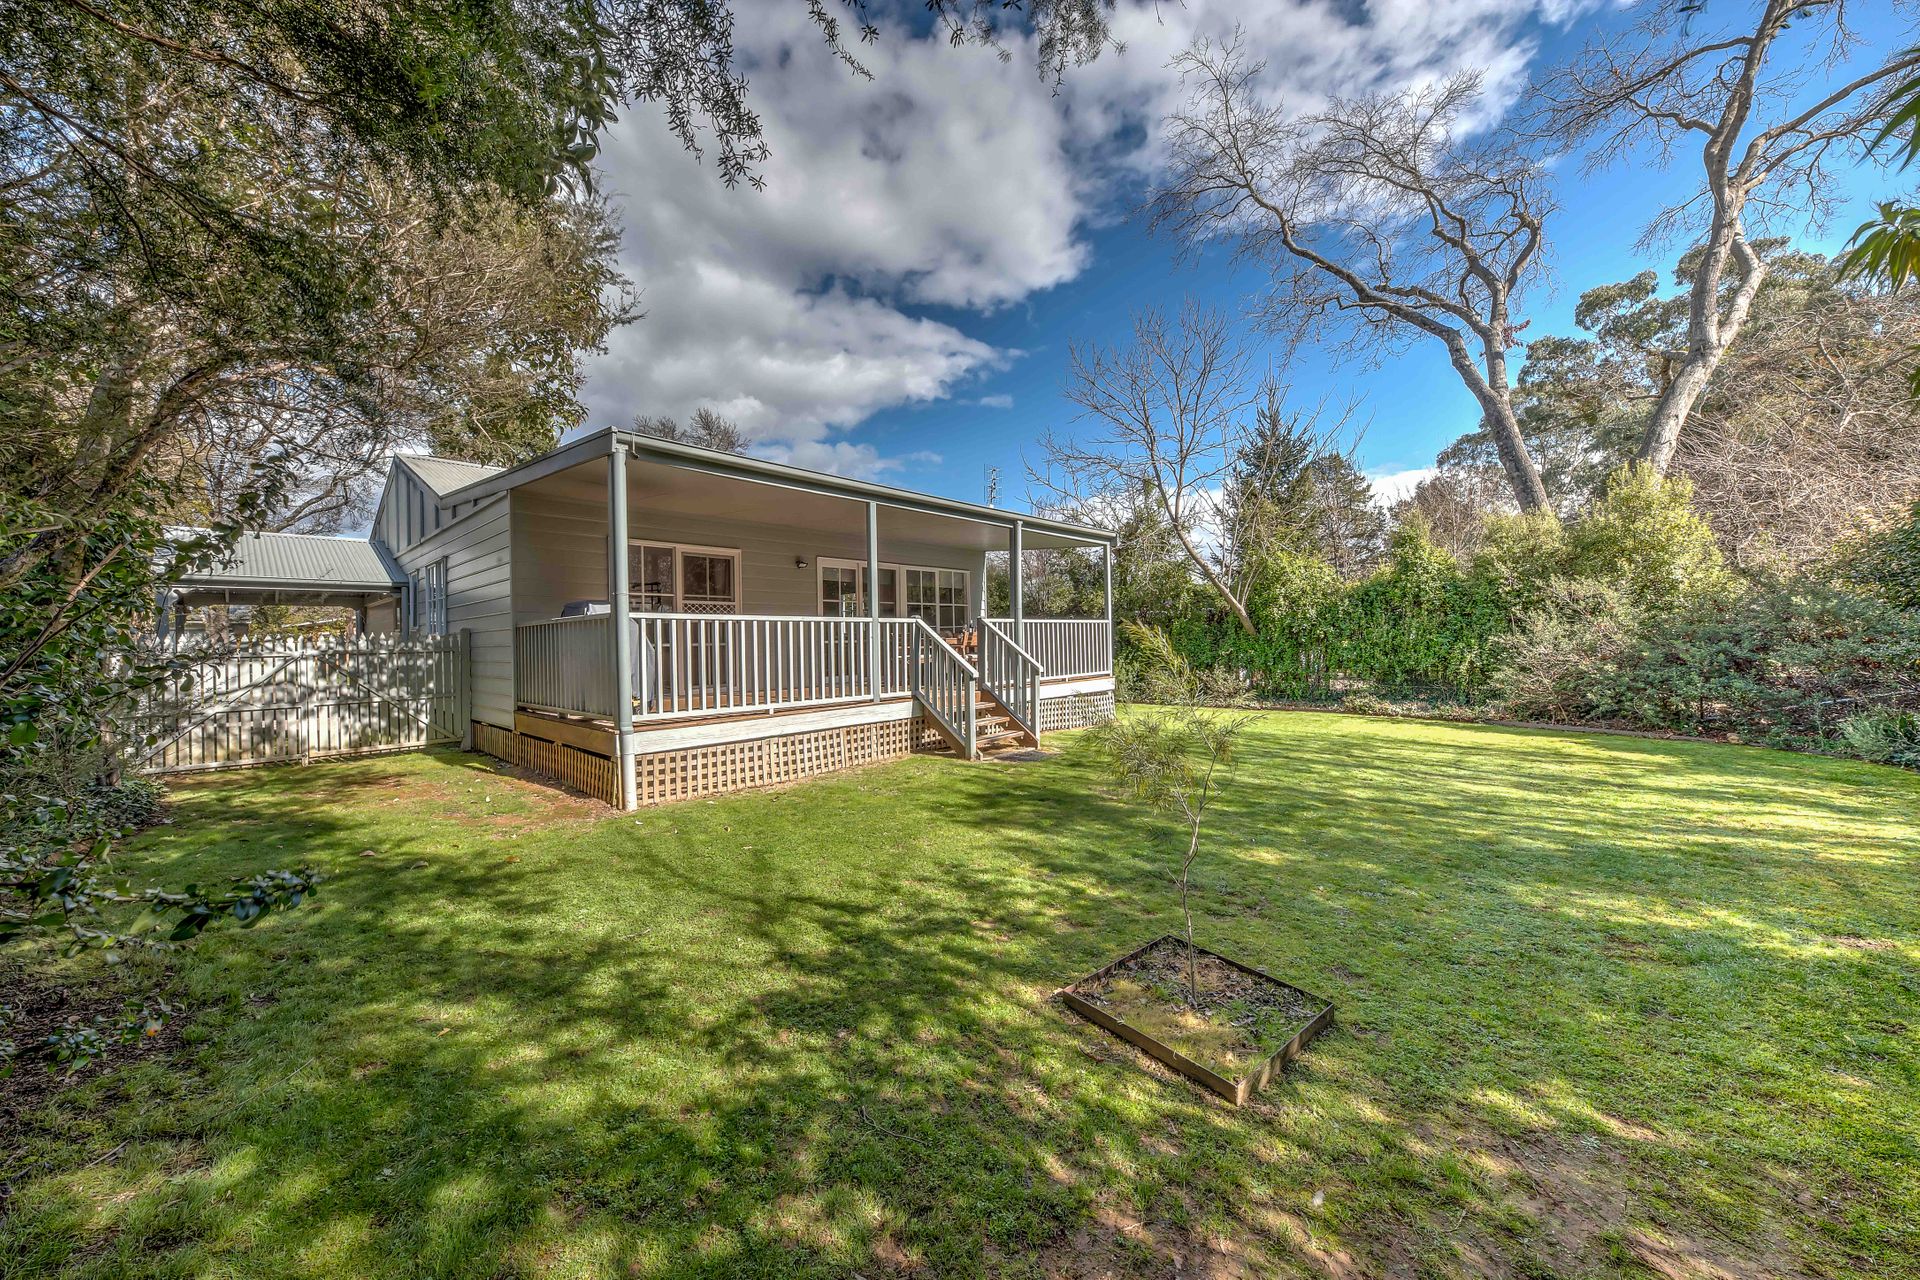 Corinda Cottage – 4 bedroom pet friendly five minute walk to town and Ovens River.